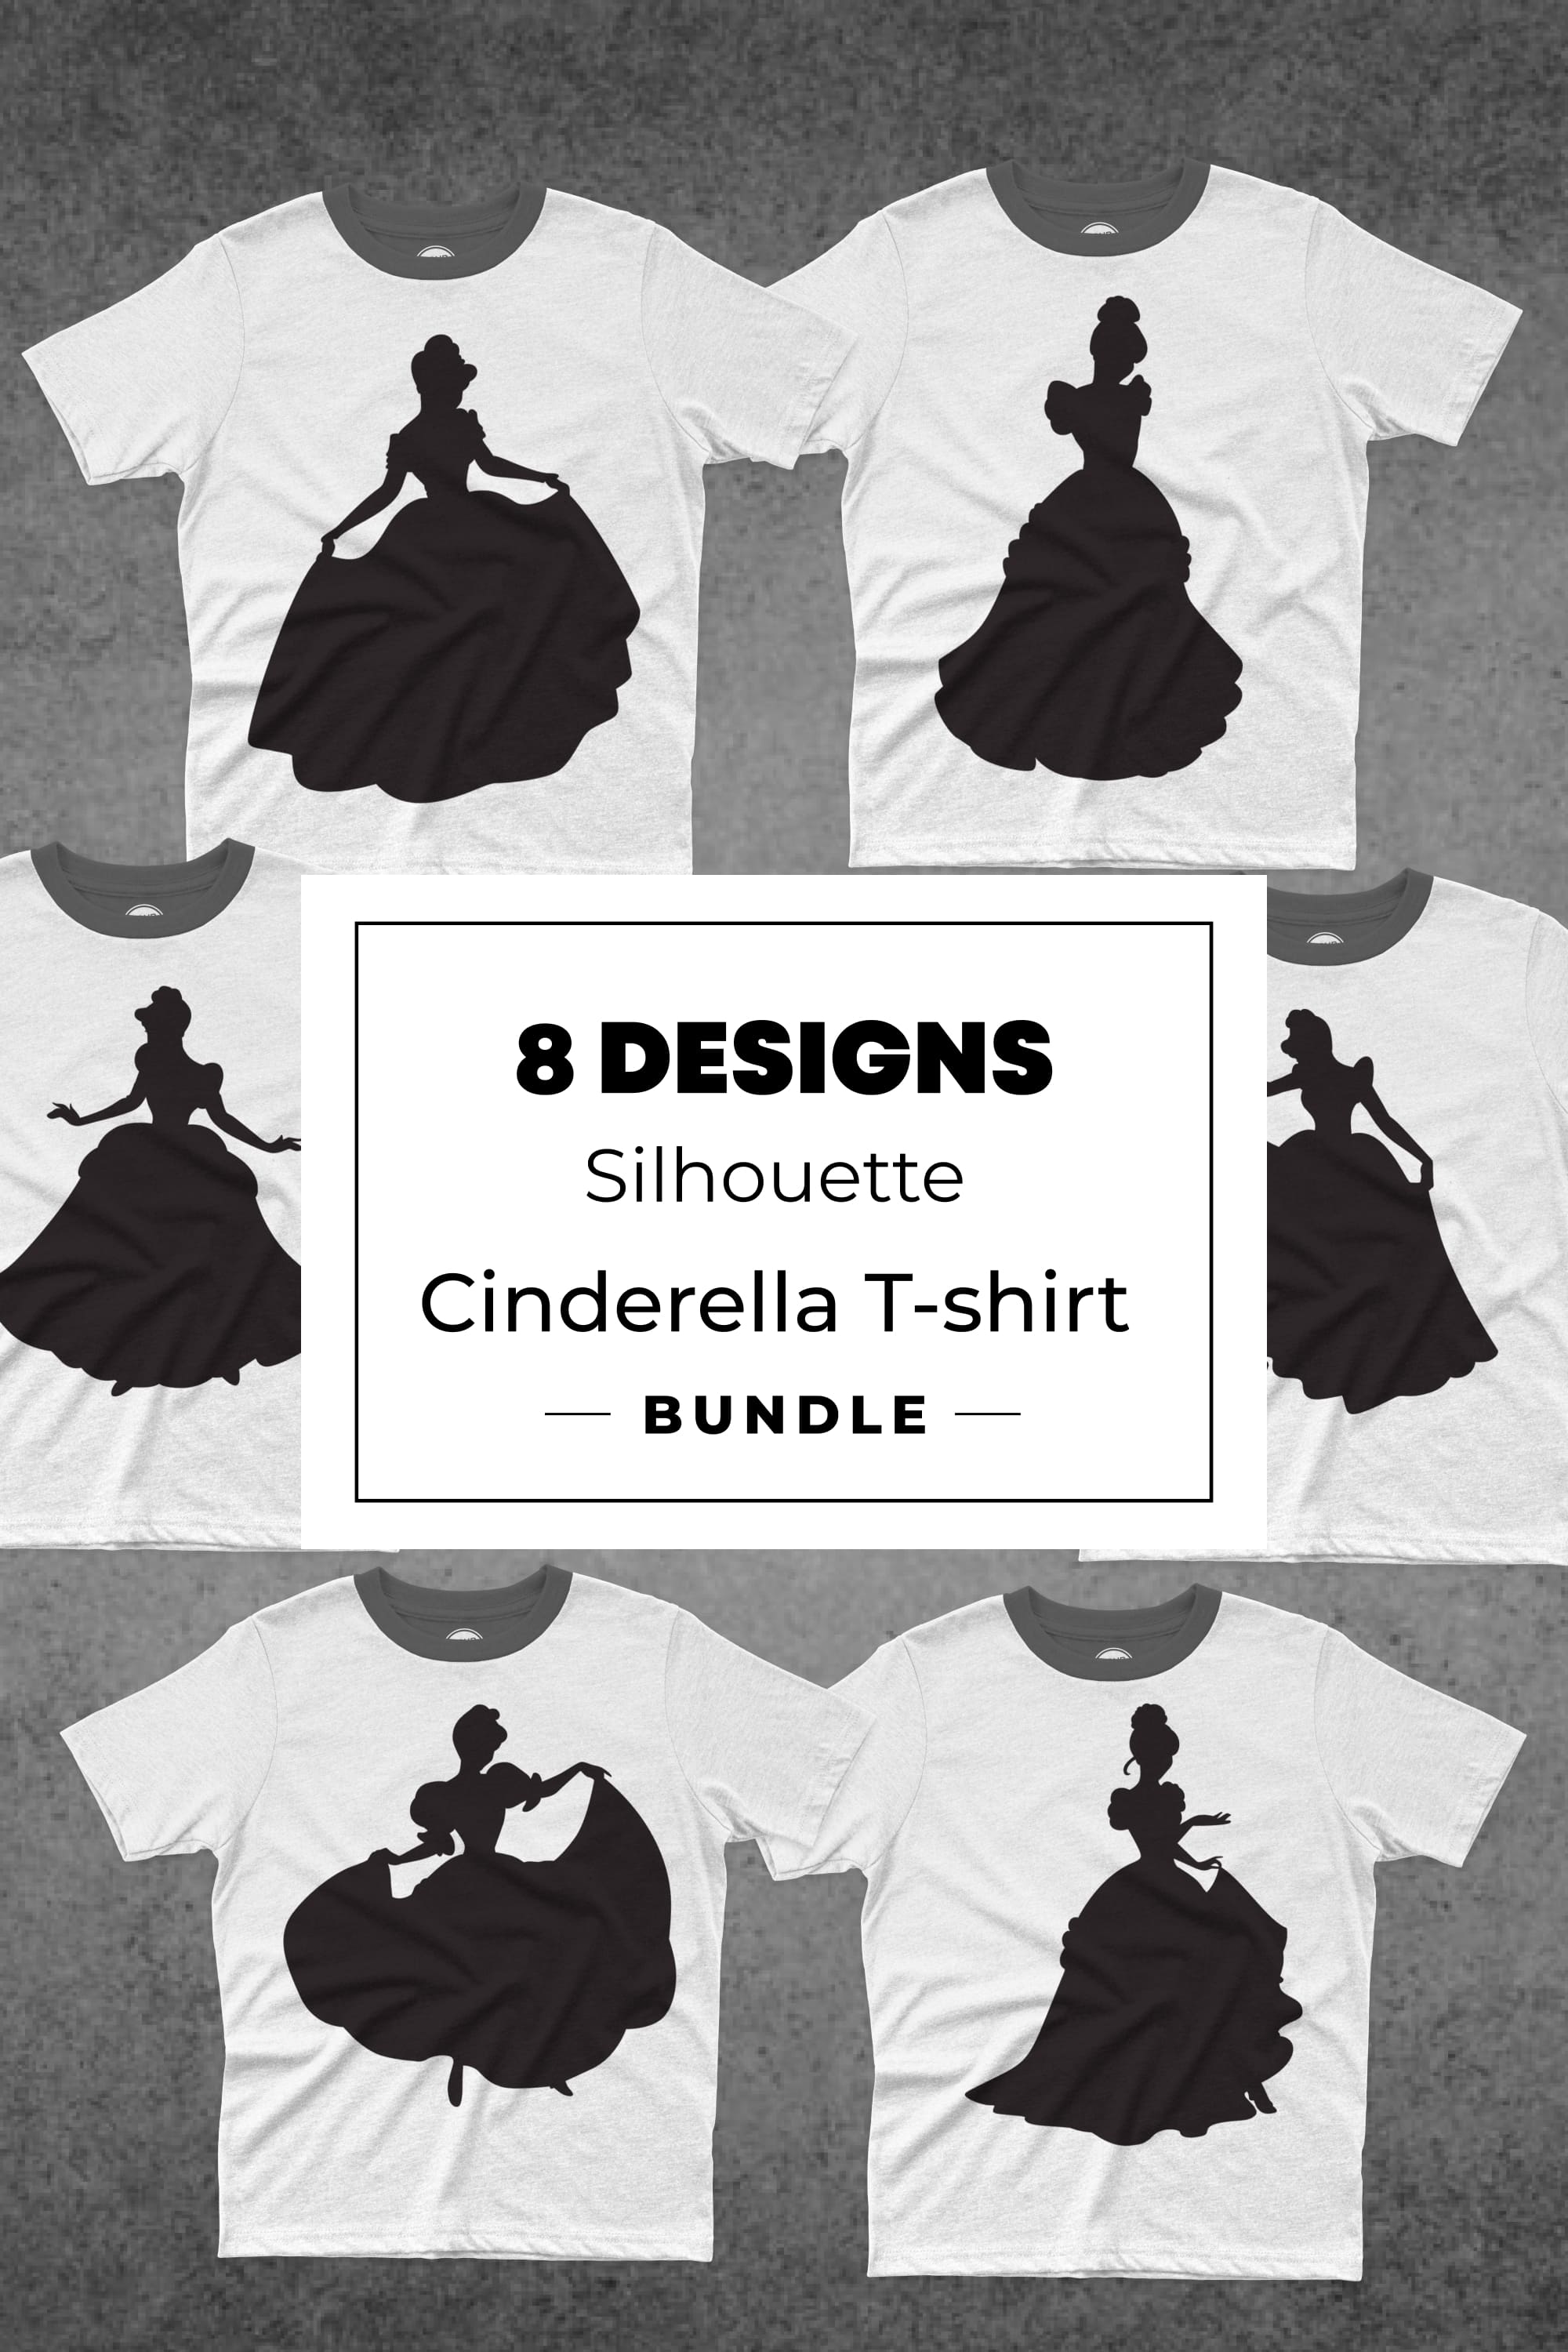 A pack of images of T-shirts with a gorgeous print of the Cinderella silhouette.